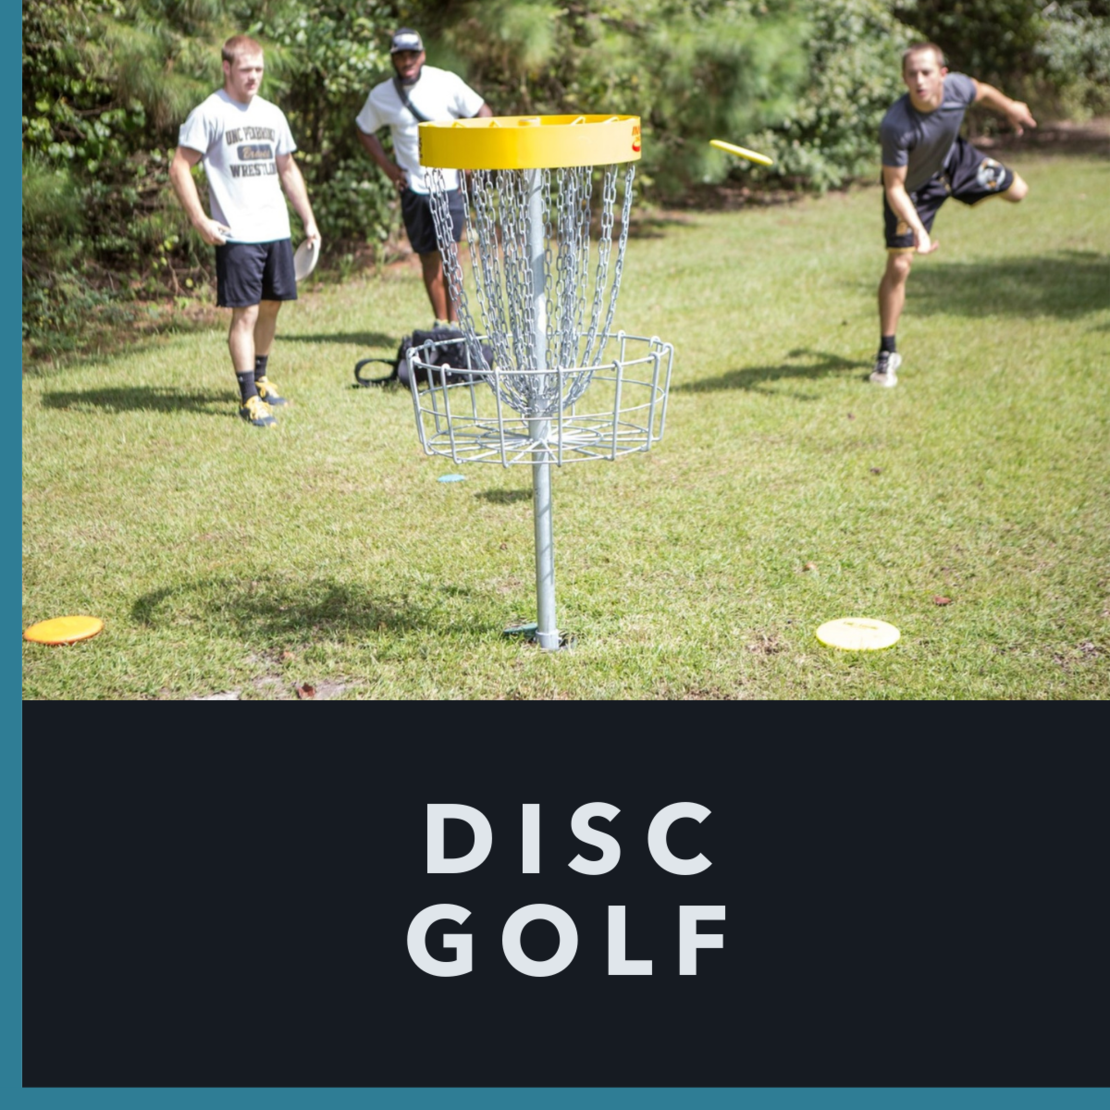 Students playing disc golf